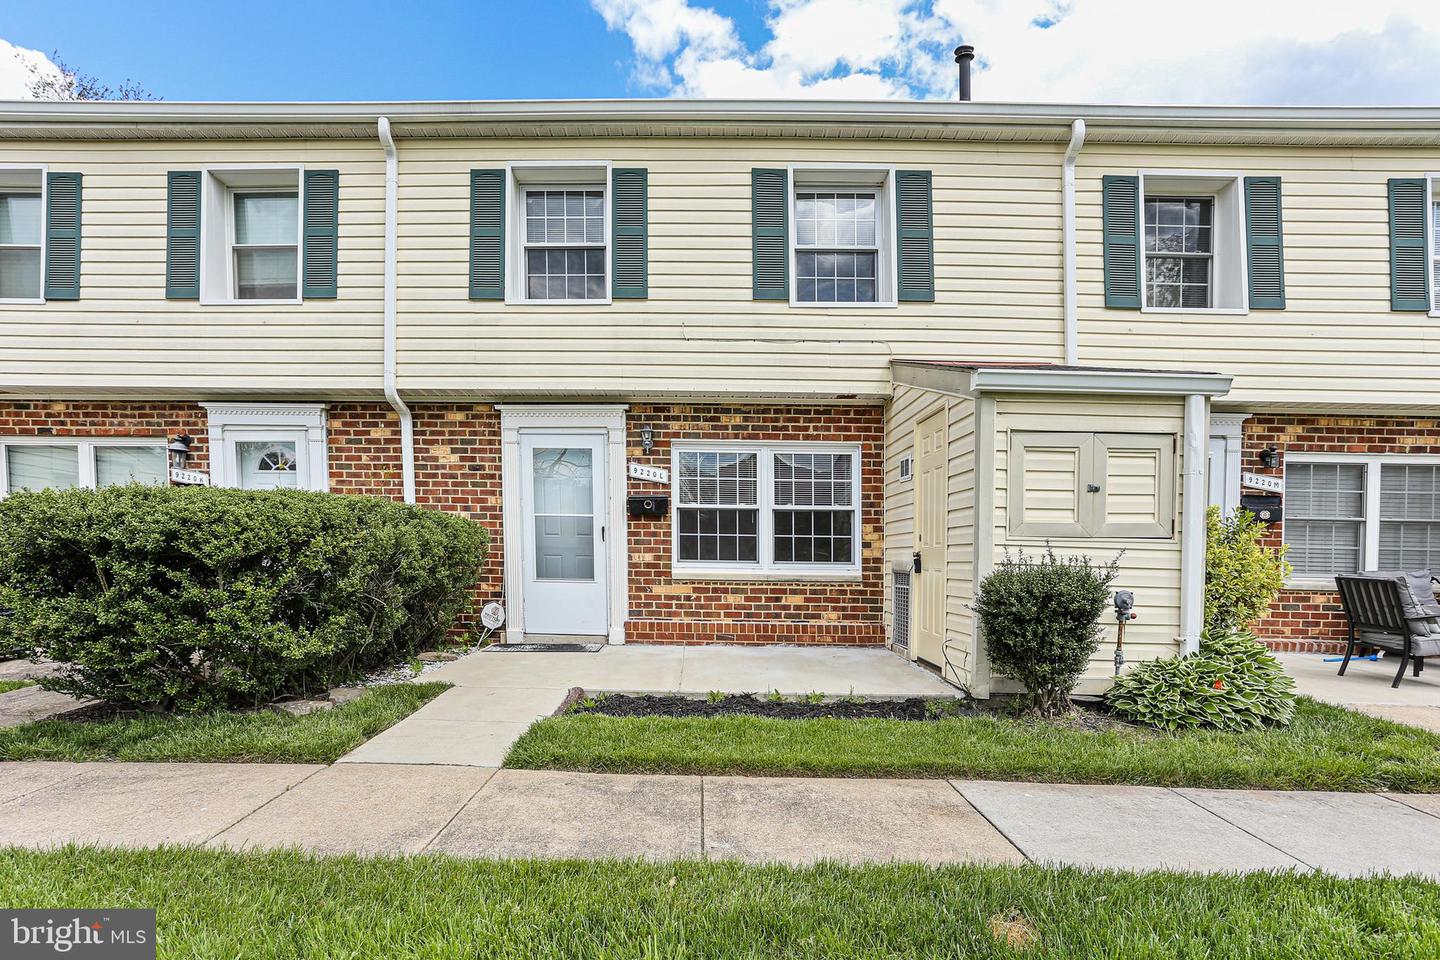 View Laurel, MD 20723 townhome